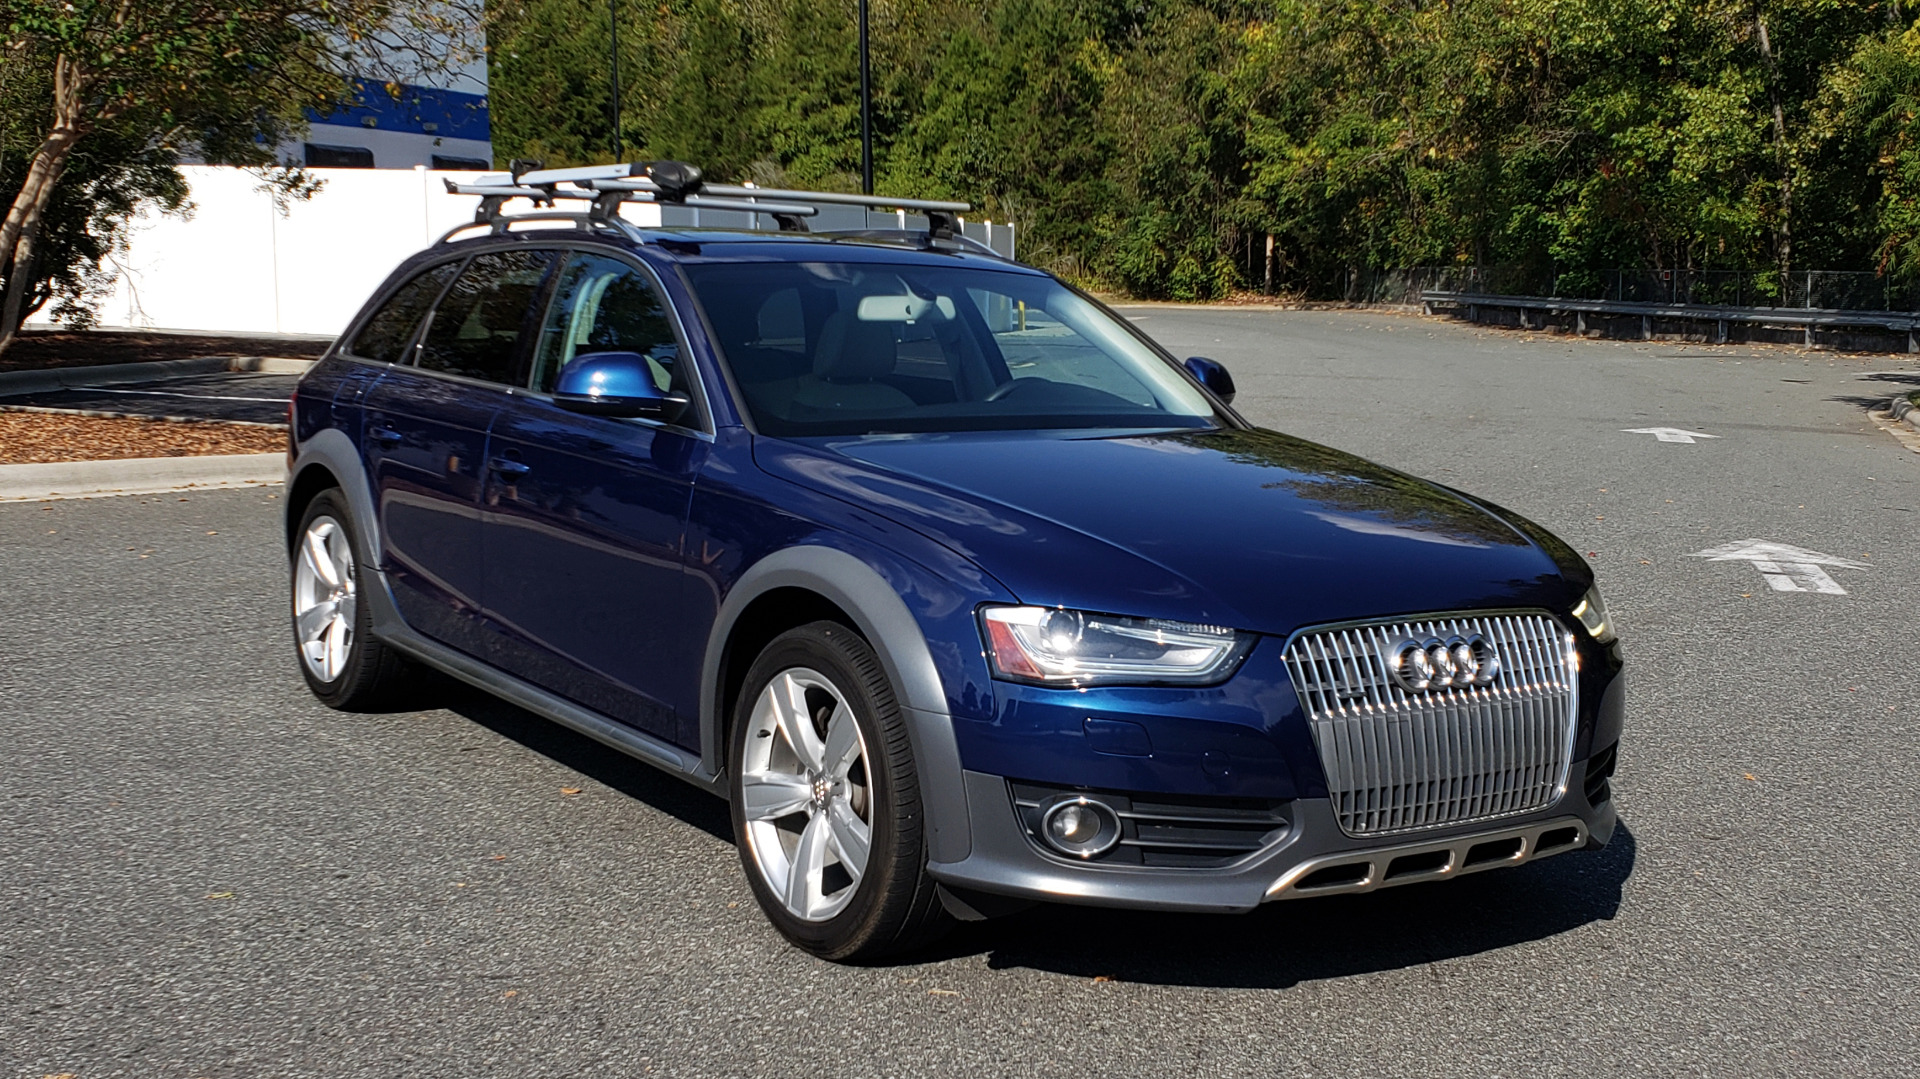 Used 2015 Audi ALLROADS PREMIUM / SUNROOF / ROOF-RACK / 18 INCH WHEELS for sale Sold at Formula Imports in Charlotte NC 28227 10